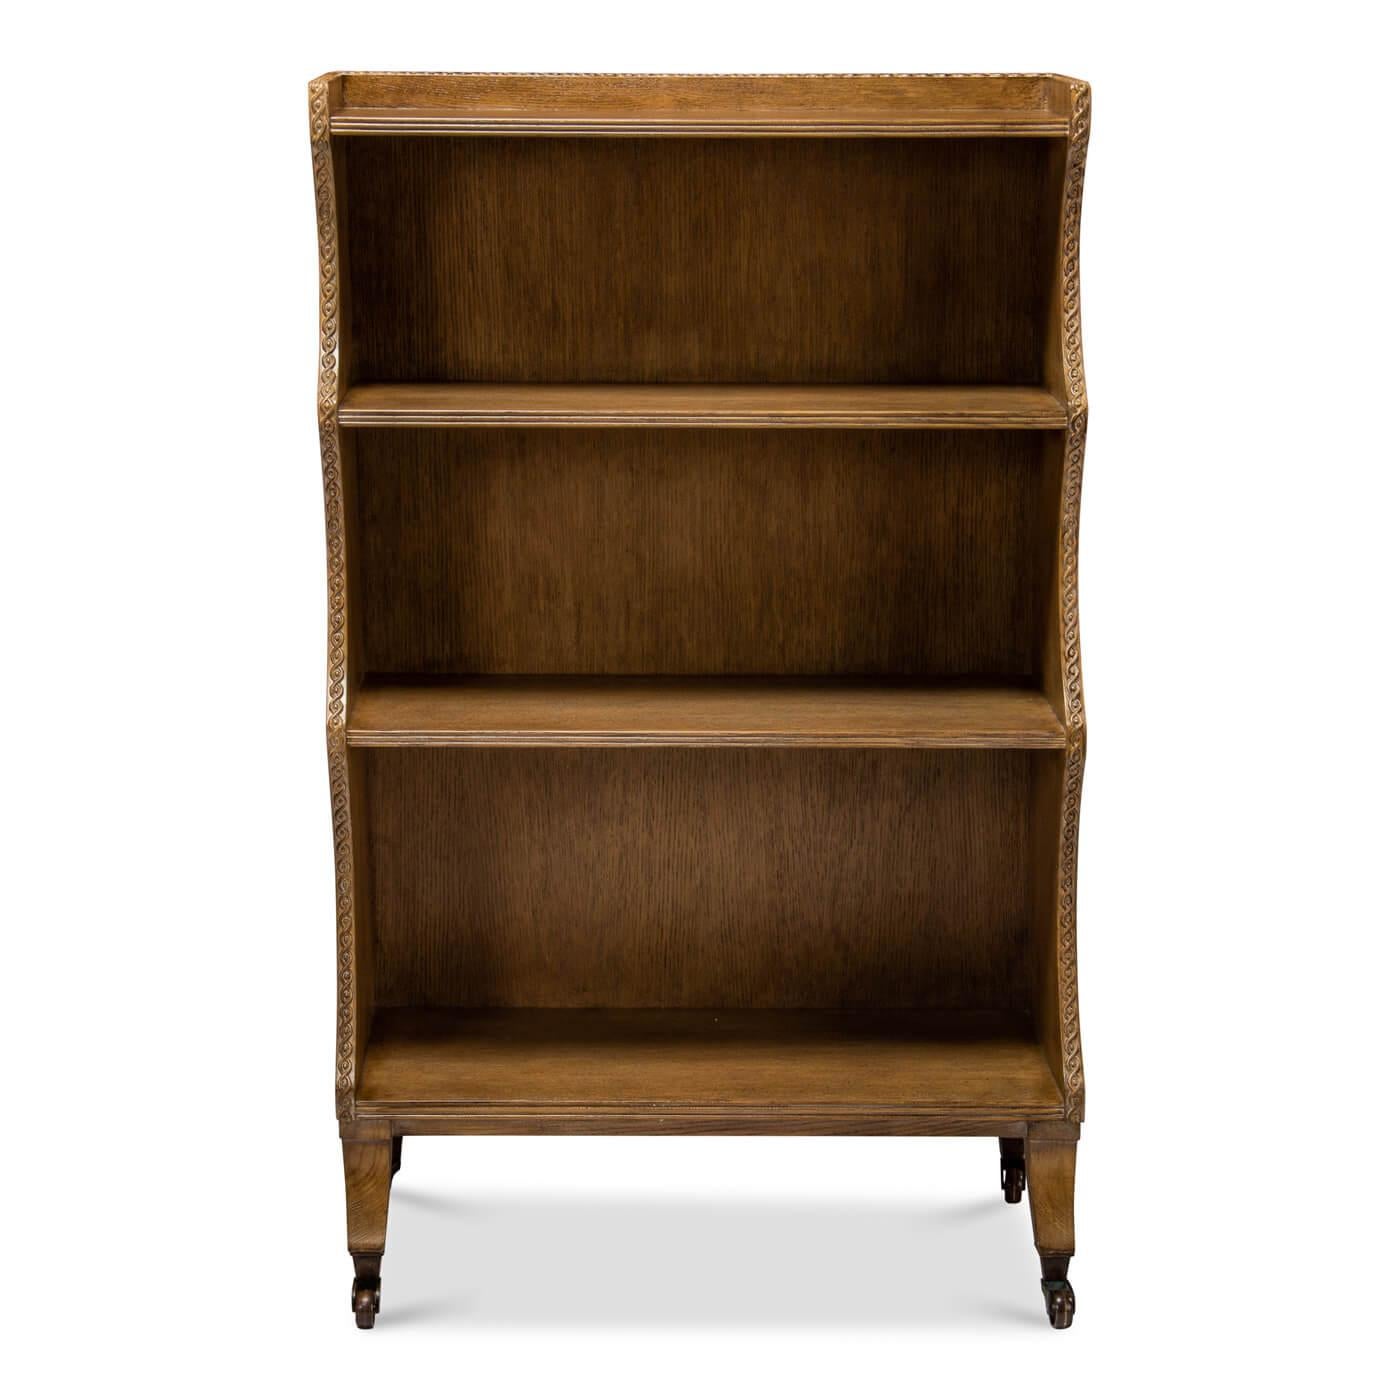 An English Regency style four-tier bookcase with a curved frame design. The oak bookcase is full of unique details including a carved guilloche detail along the top and sides, graduating shelves, raised on sabre form legs and brass castor feet. A